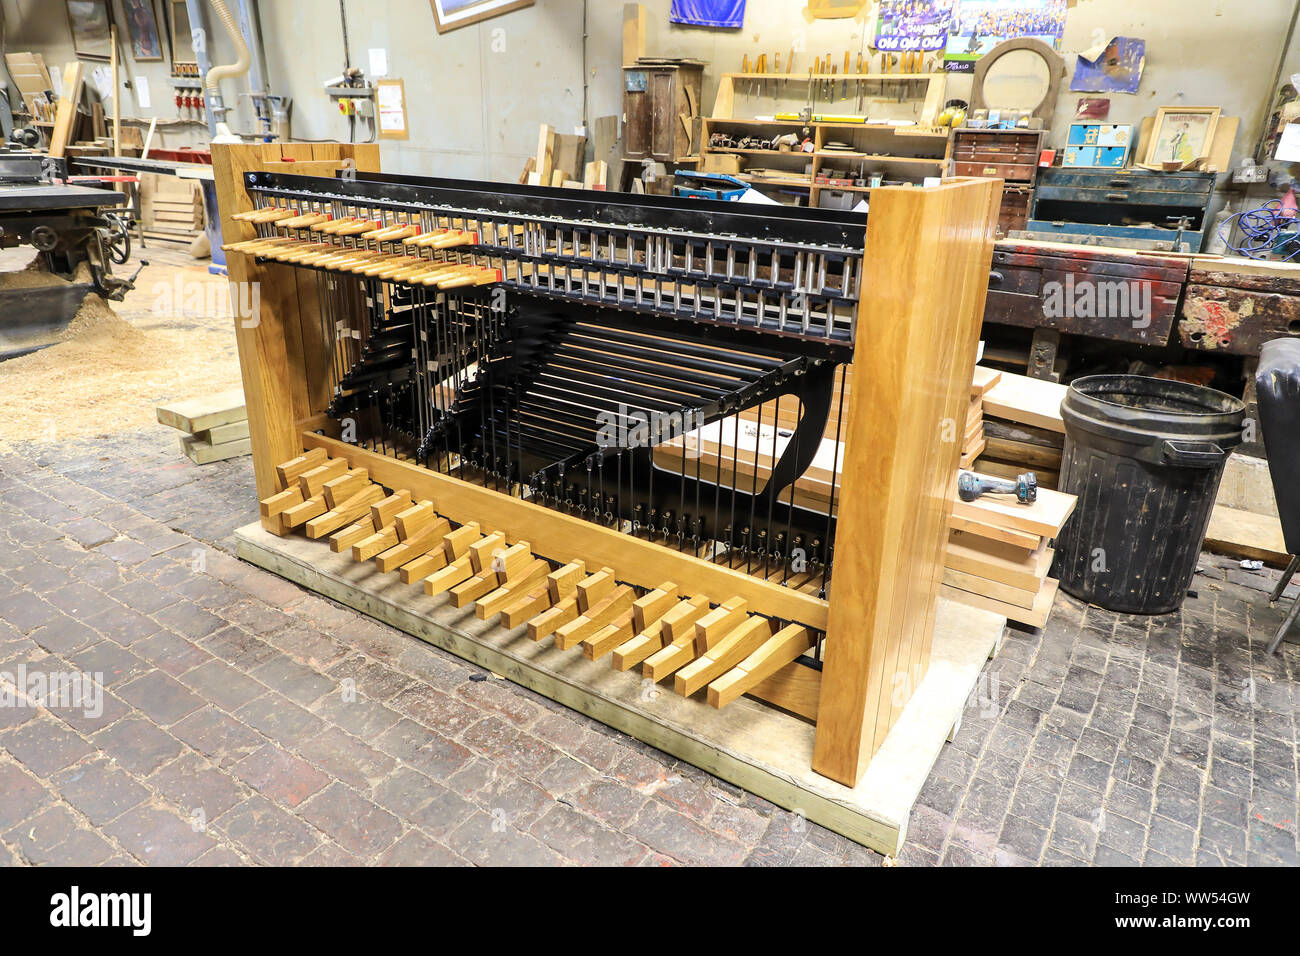 A musical instrument called a carillon being made at the John Taylor & Company Bell Foundry, Loughborough, Leicestershire, England, UK Stock Photo